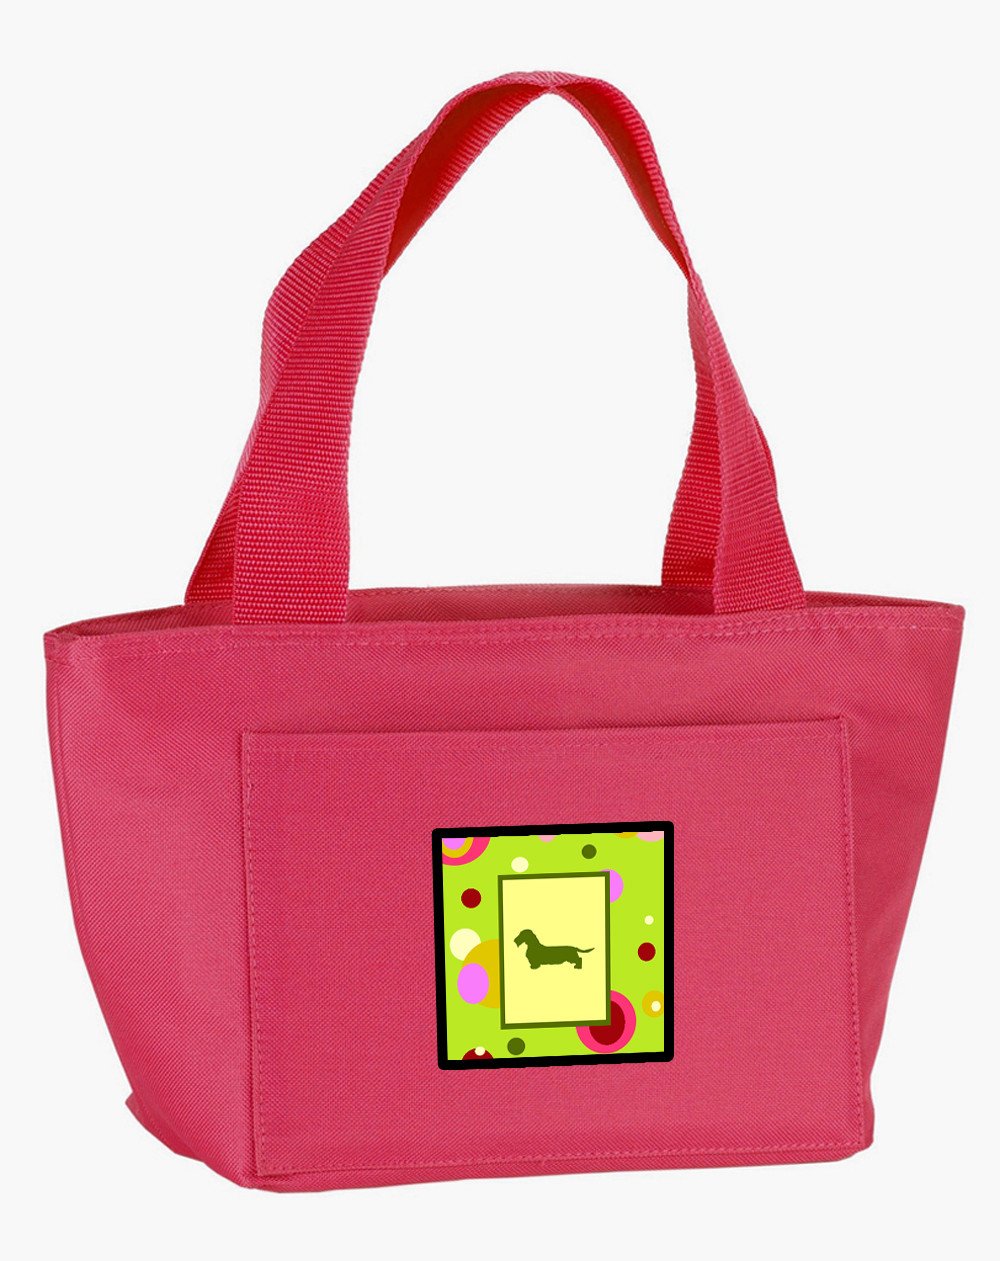 Lime Green Dots Dachshund Lunch Bag CK1133PK-8808 by Caroline's Treasures